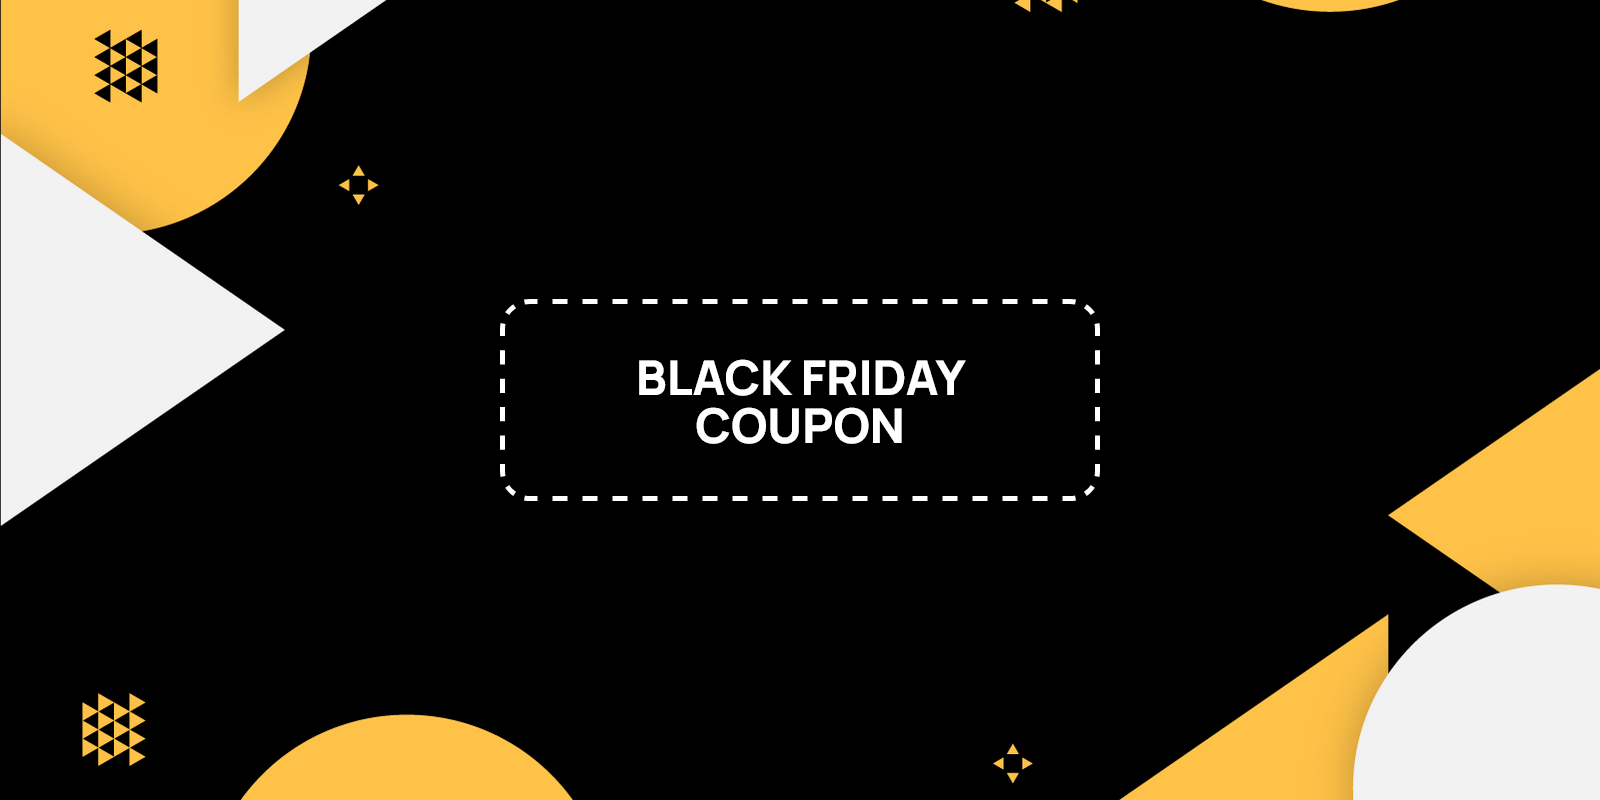 Black Friday Coupon template